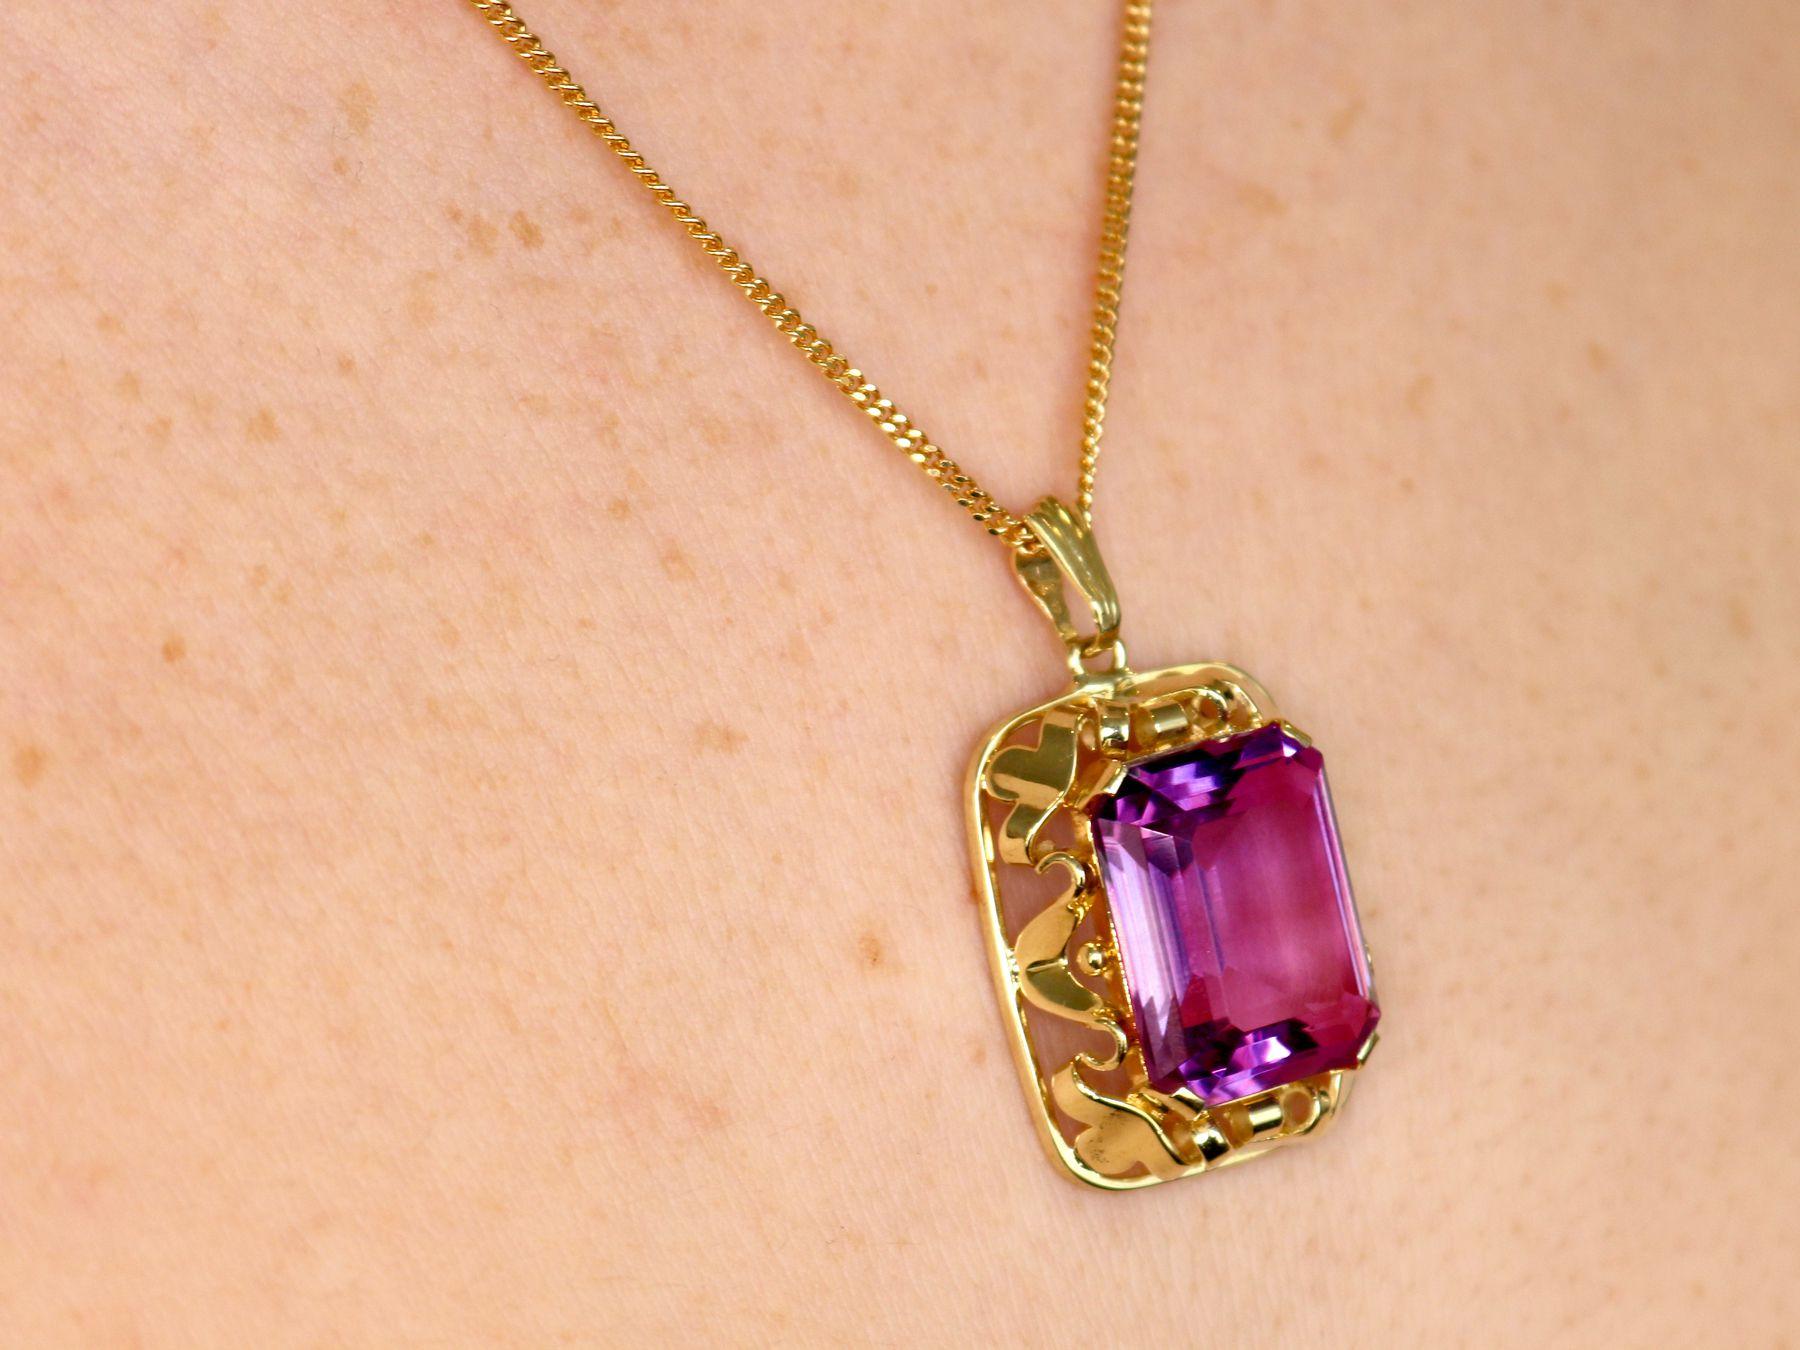 Vintage 1950s 15.41 Carat Amethyst and Yellow Gold Pendant For Sale 3